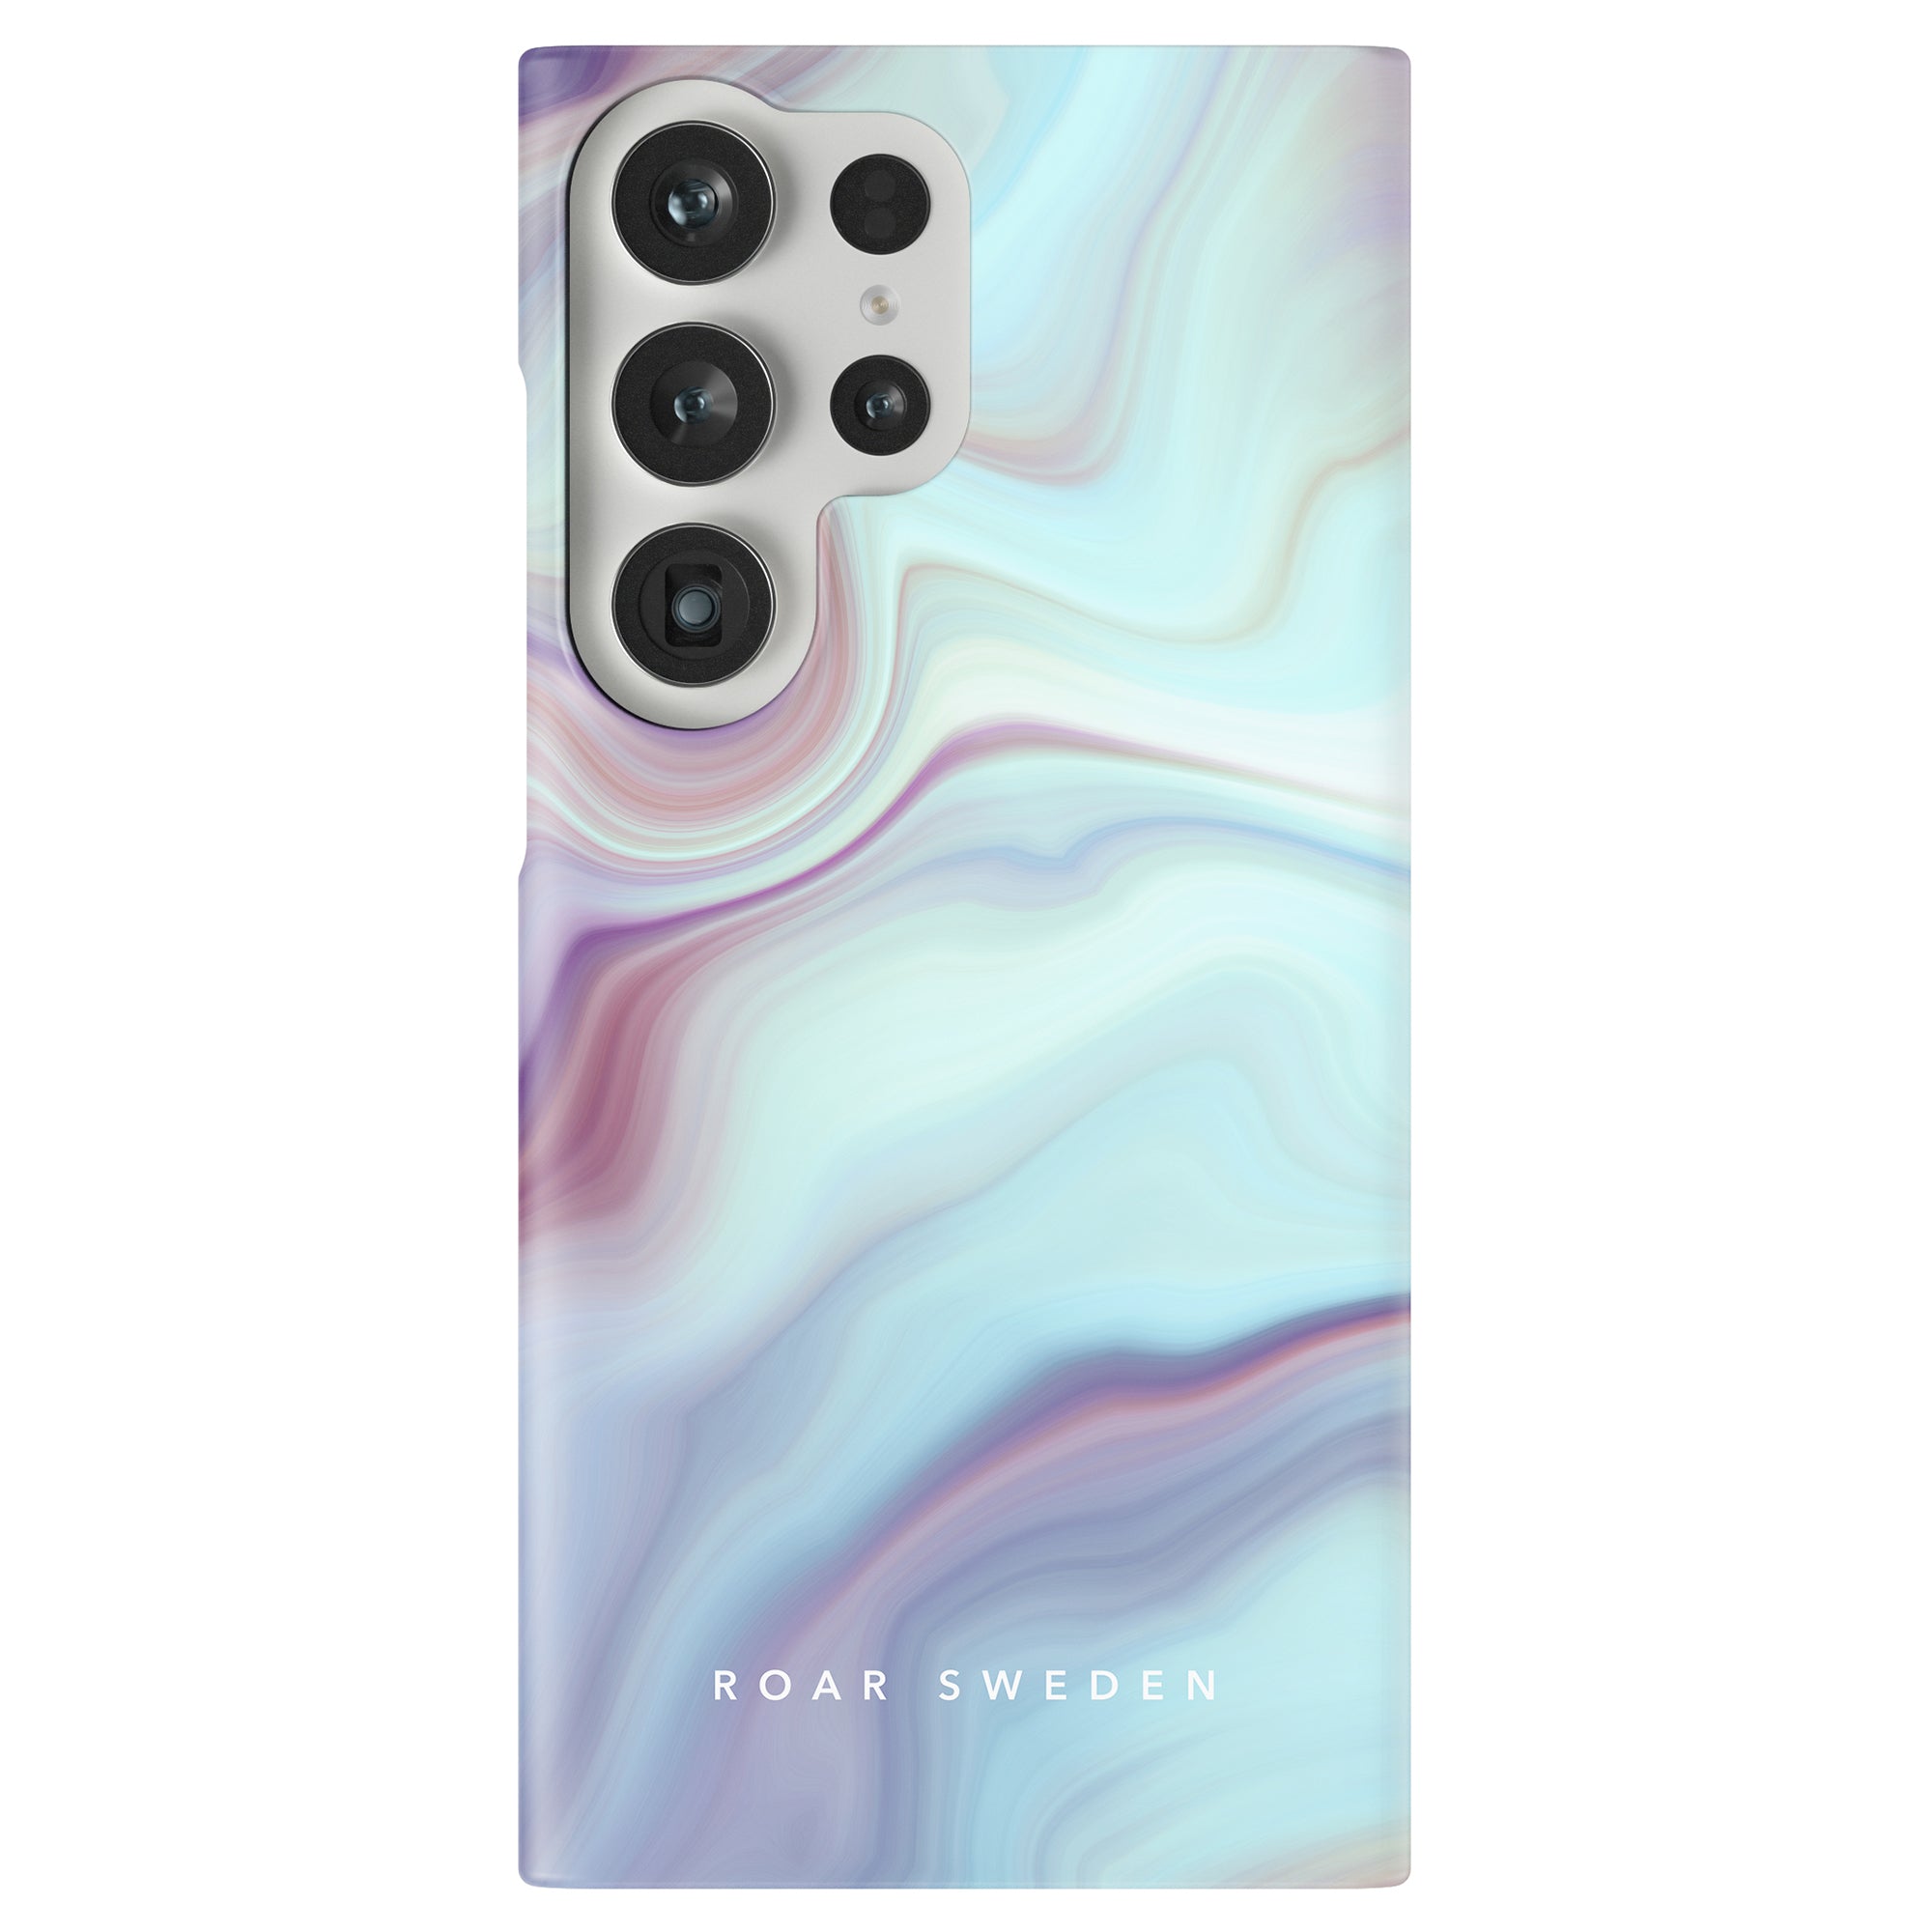 A smartphone with a multicolored, Abalone - Slim case back cover featuring four camera lenses and the text "roar sweden" at the bottom.